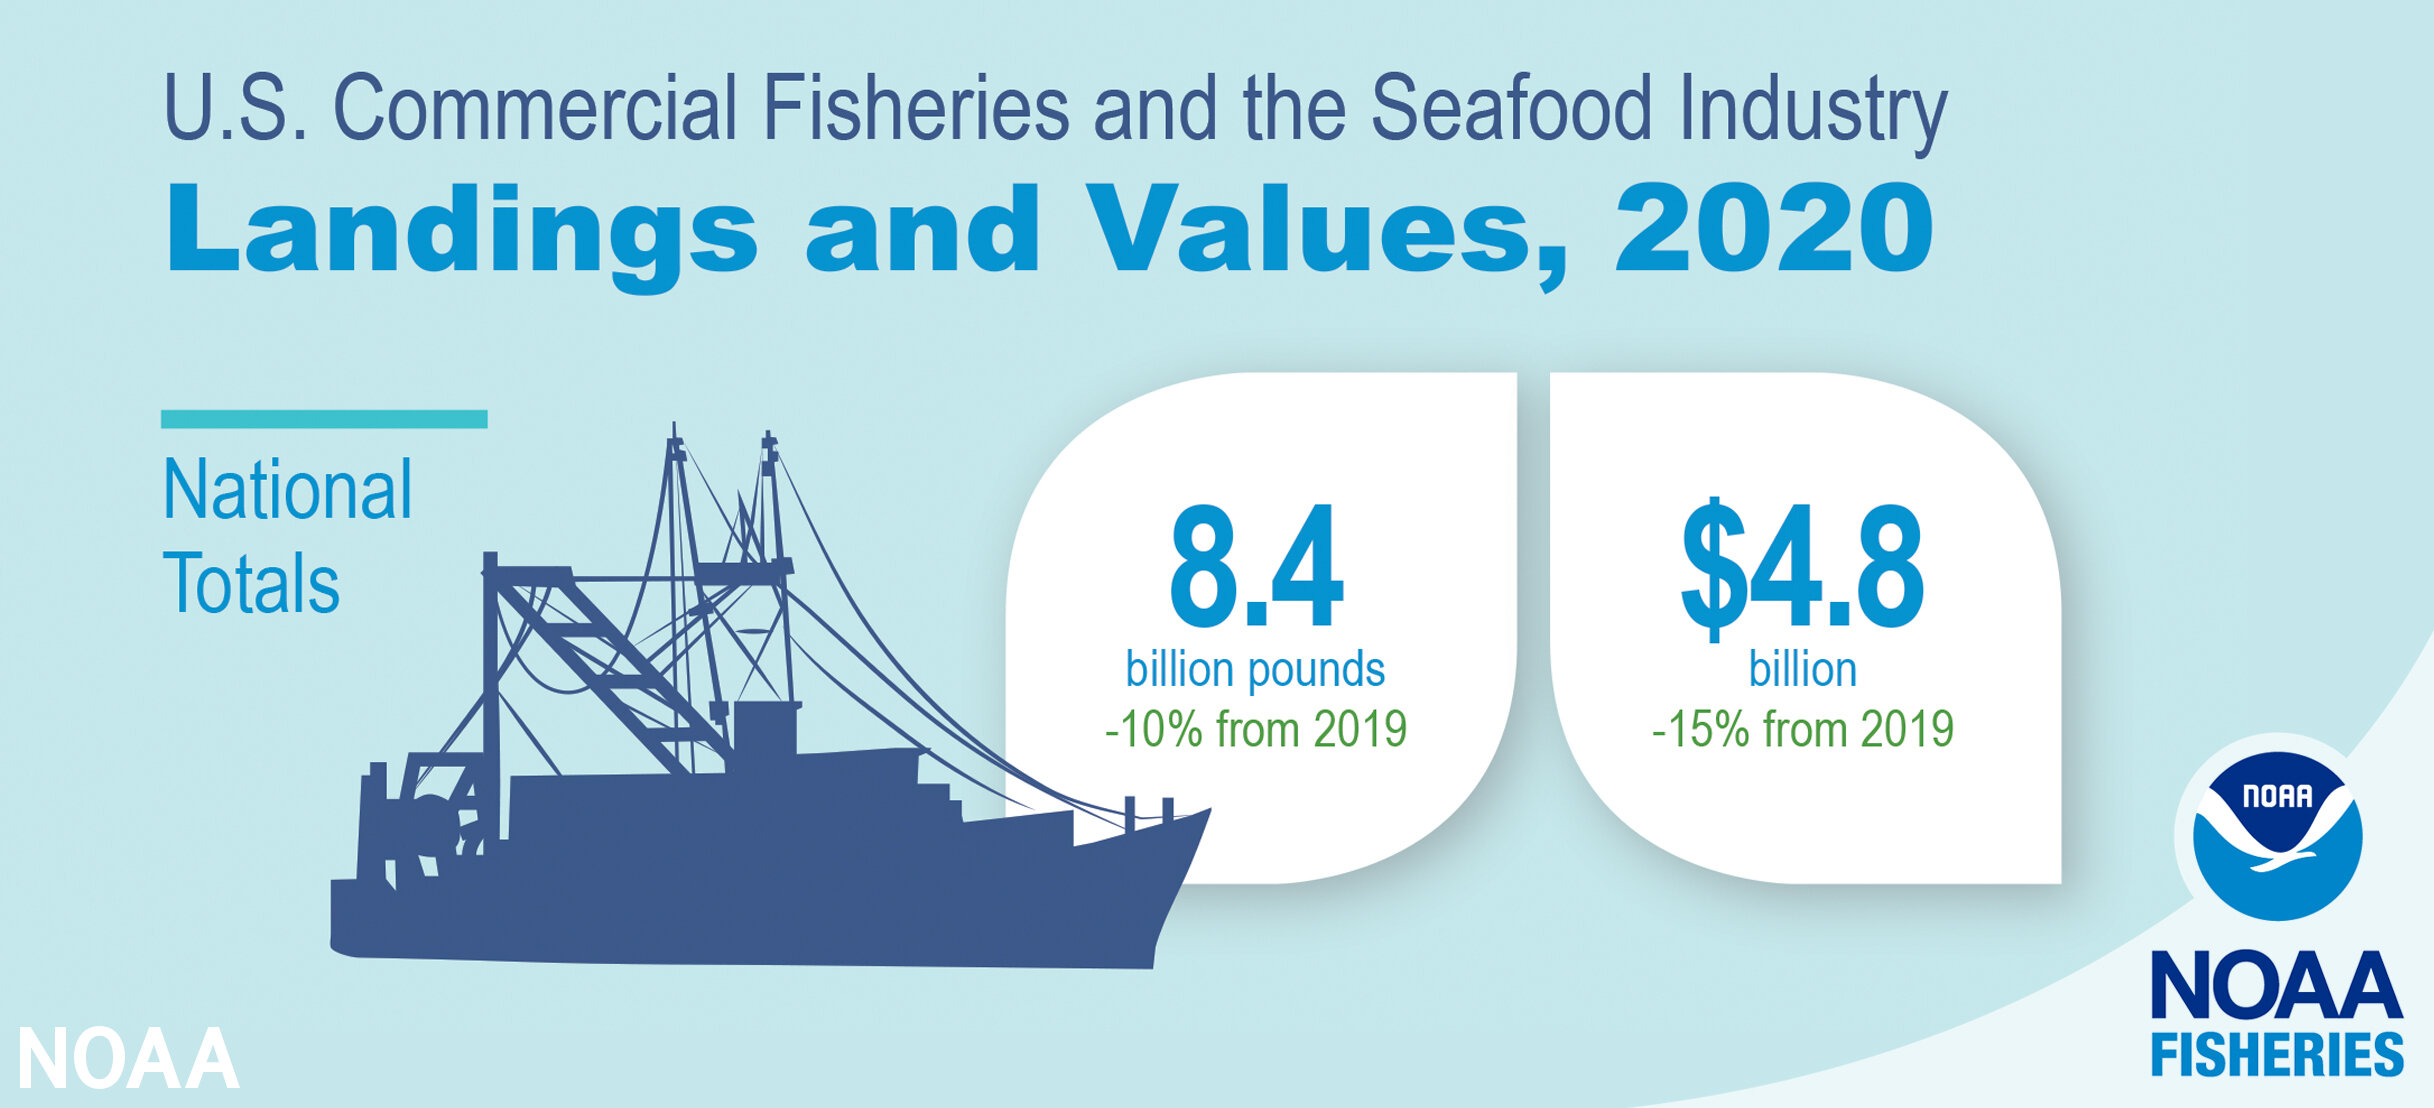 How to Invest in Seafood Stocks